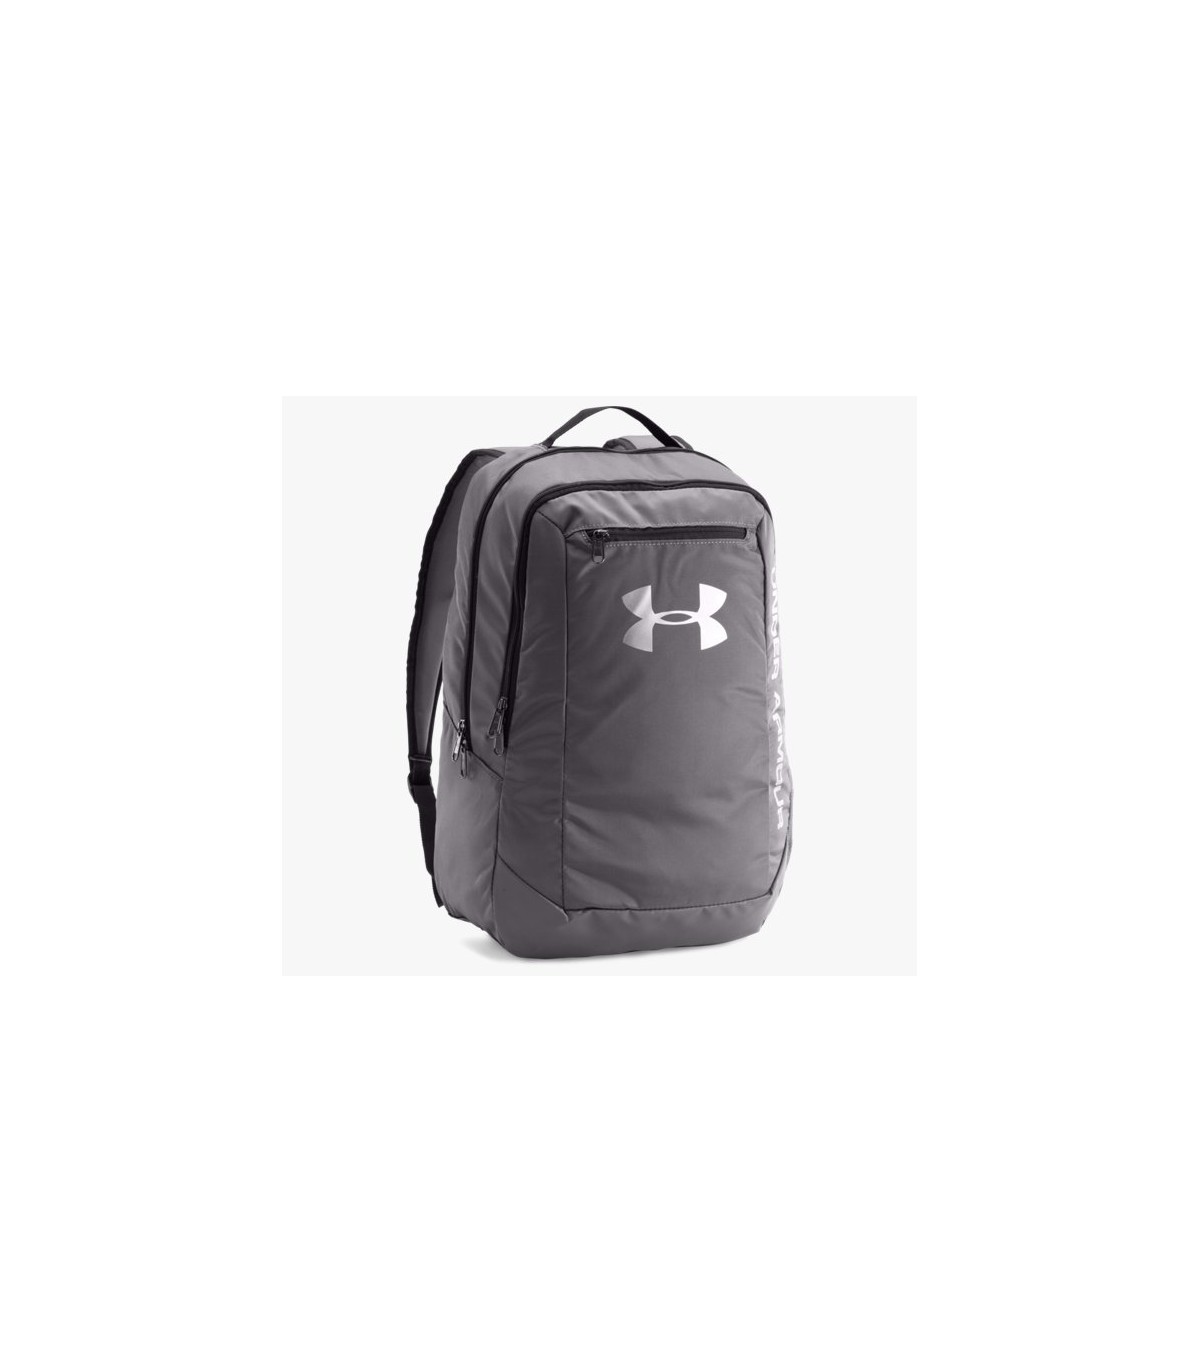 under armour rugby bag